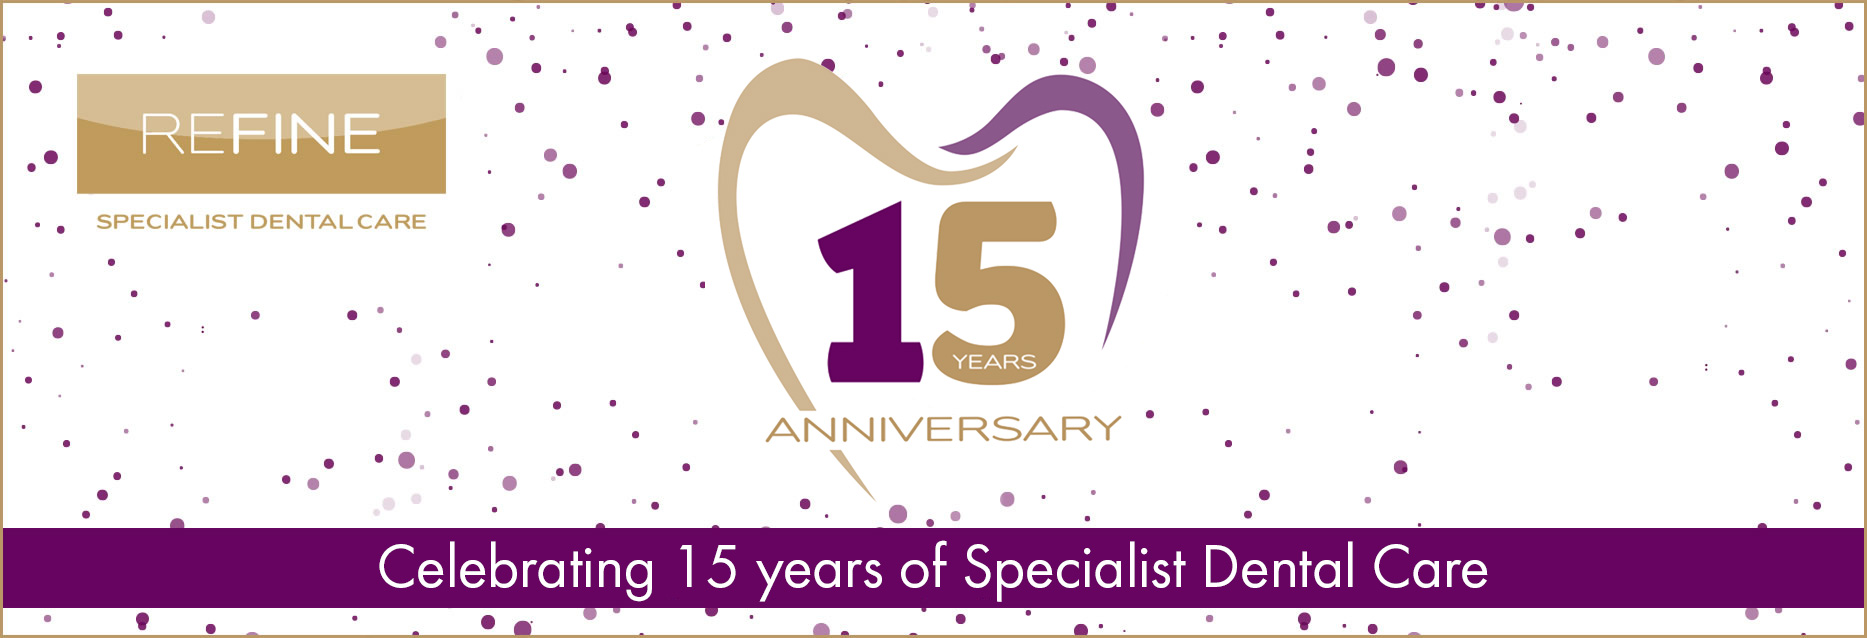 Celebrating 15 years of specialist dental care